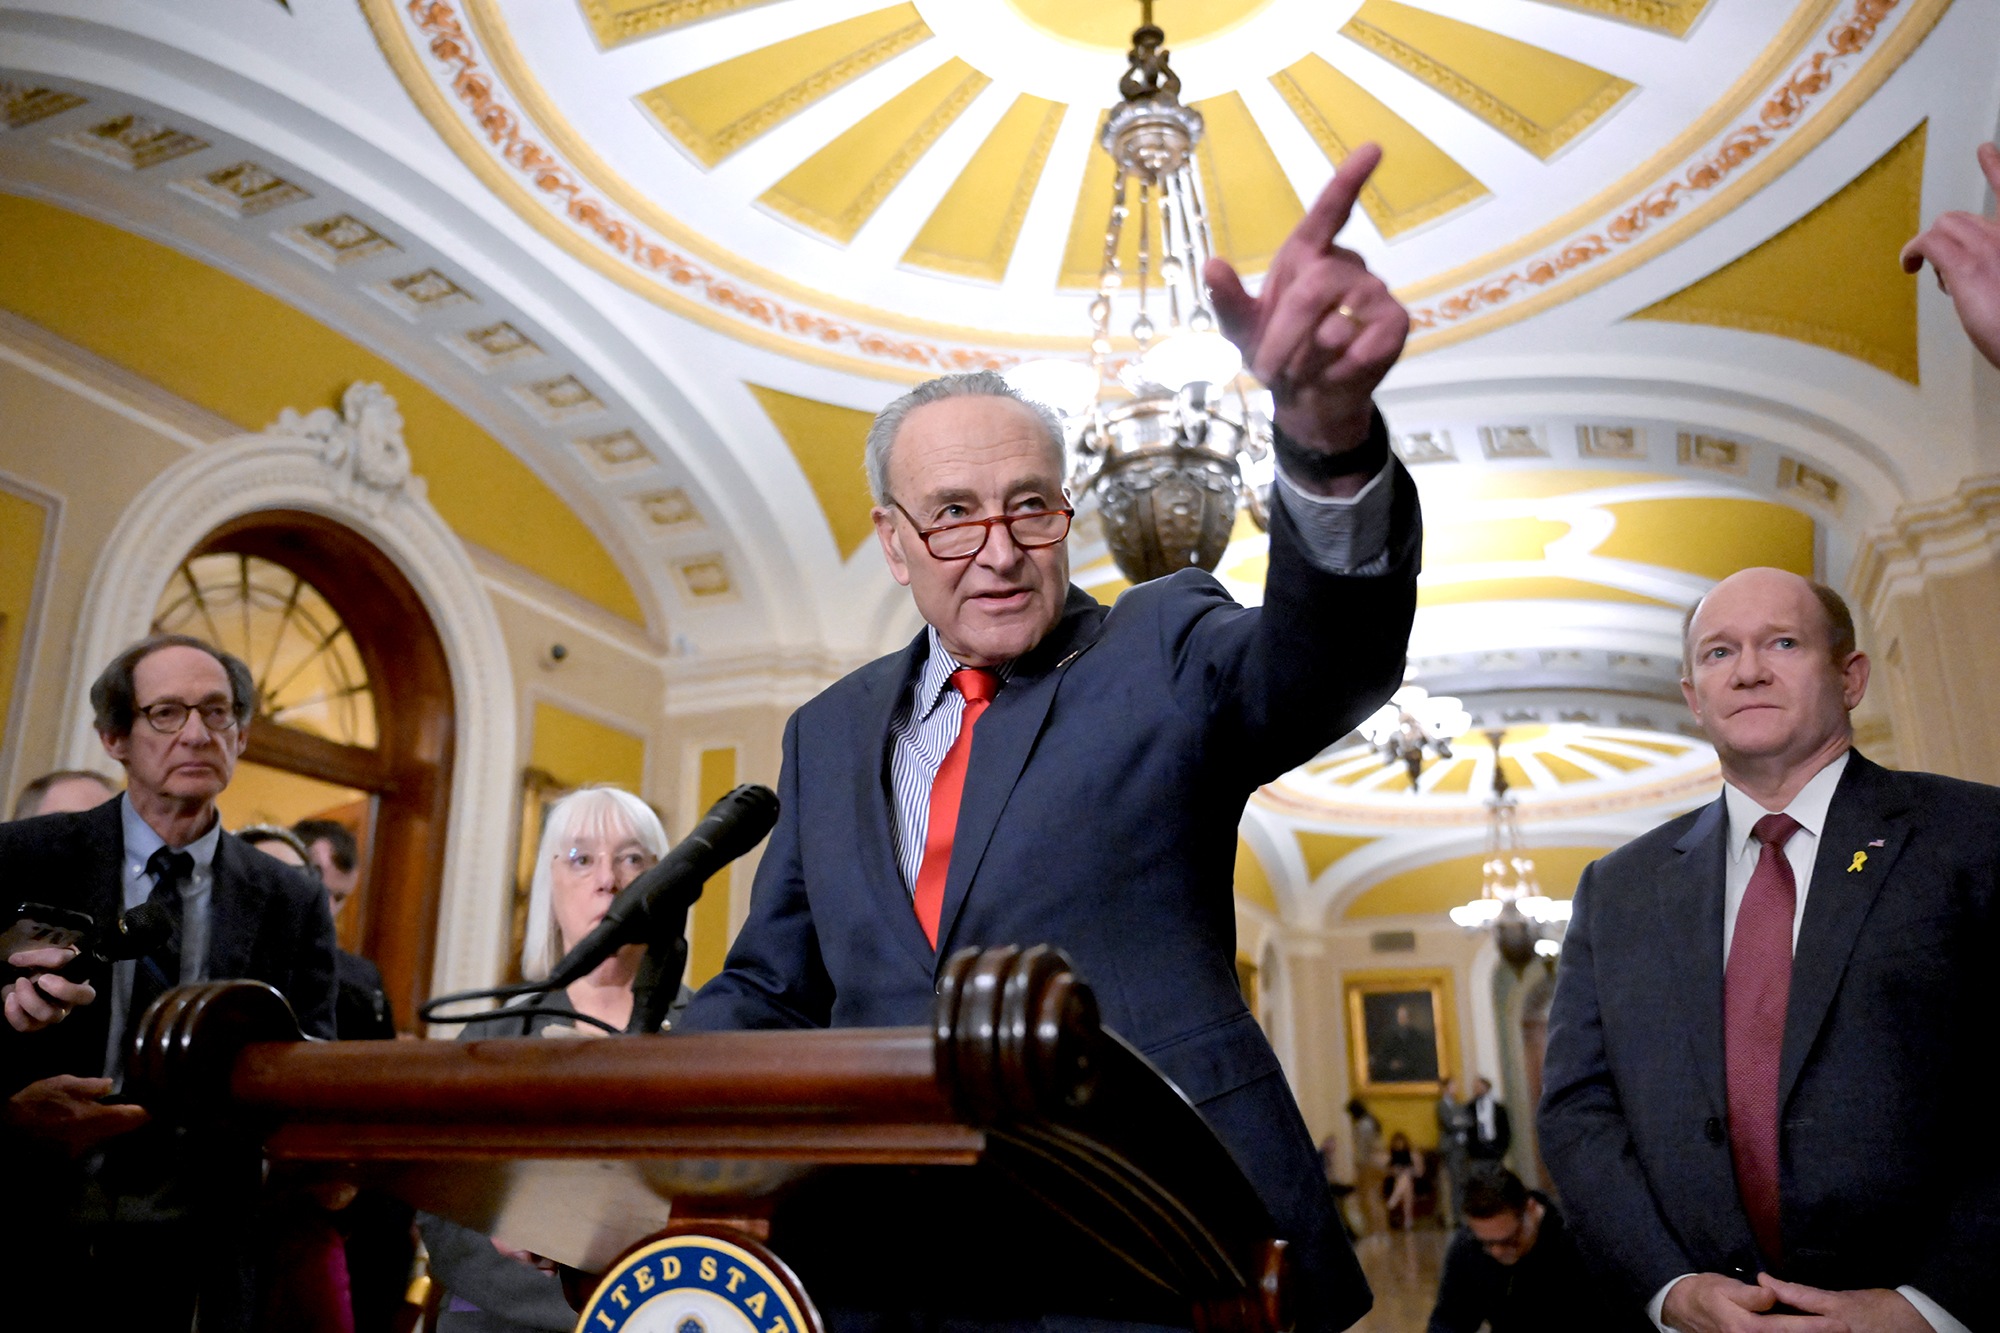 U.S. Senate Majority Leader Chuck Schumer speaks during a press conference following the weekly Senate caucus luncheons on Capitol Hill in Washington D.C, on March 12.